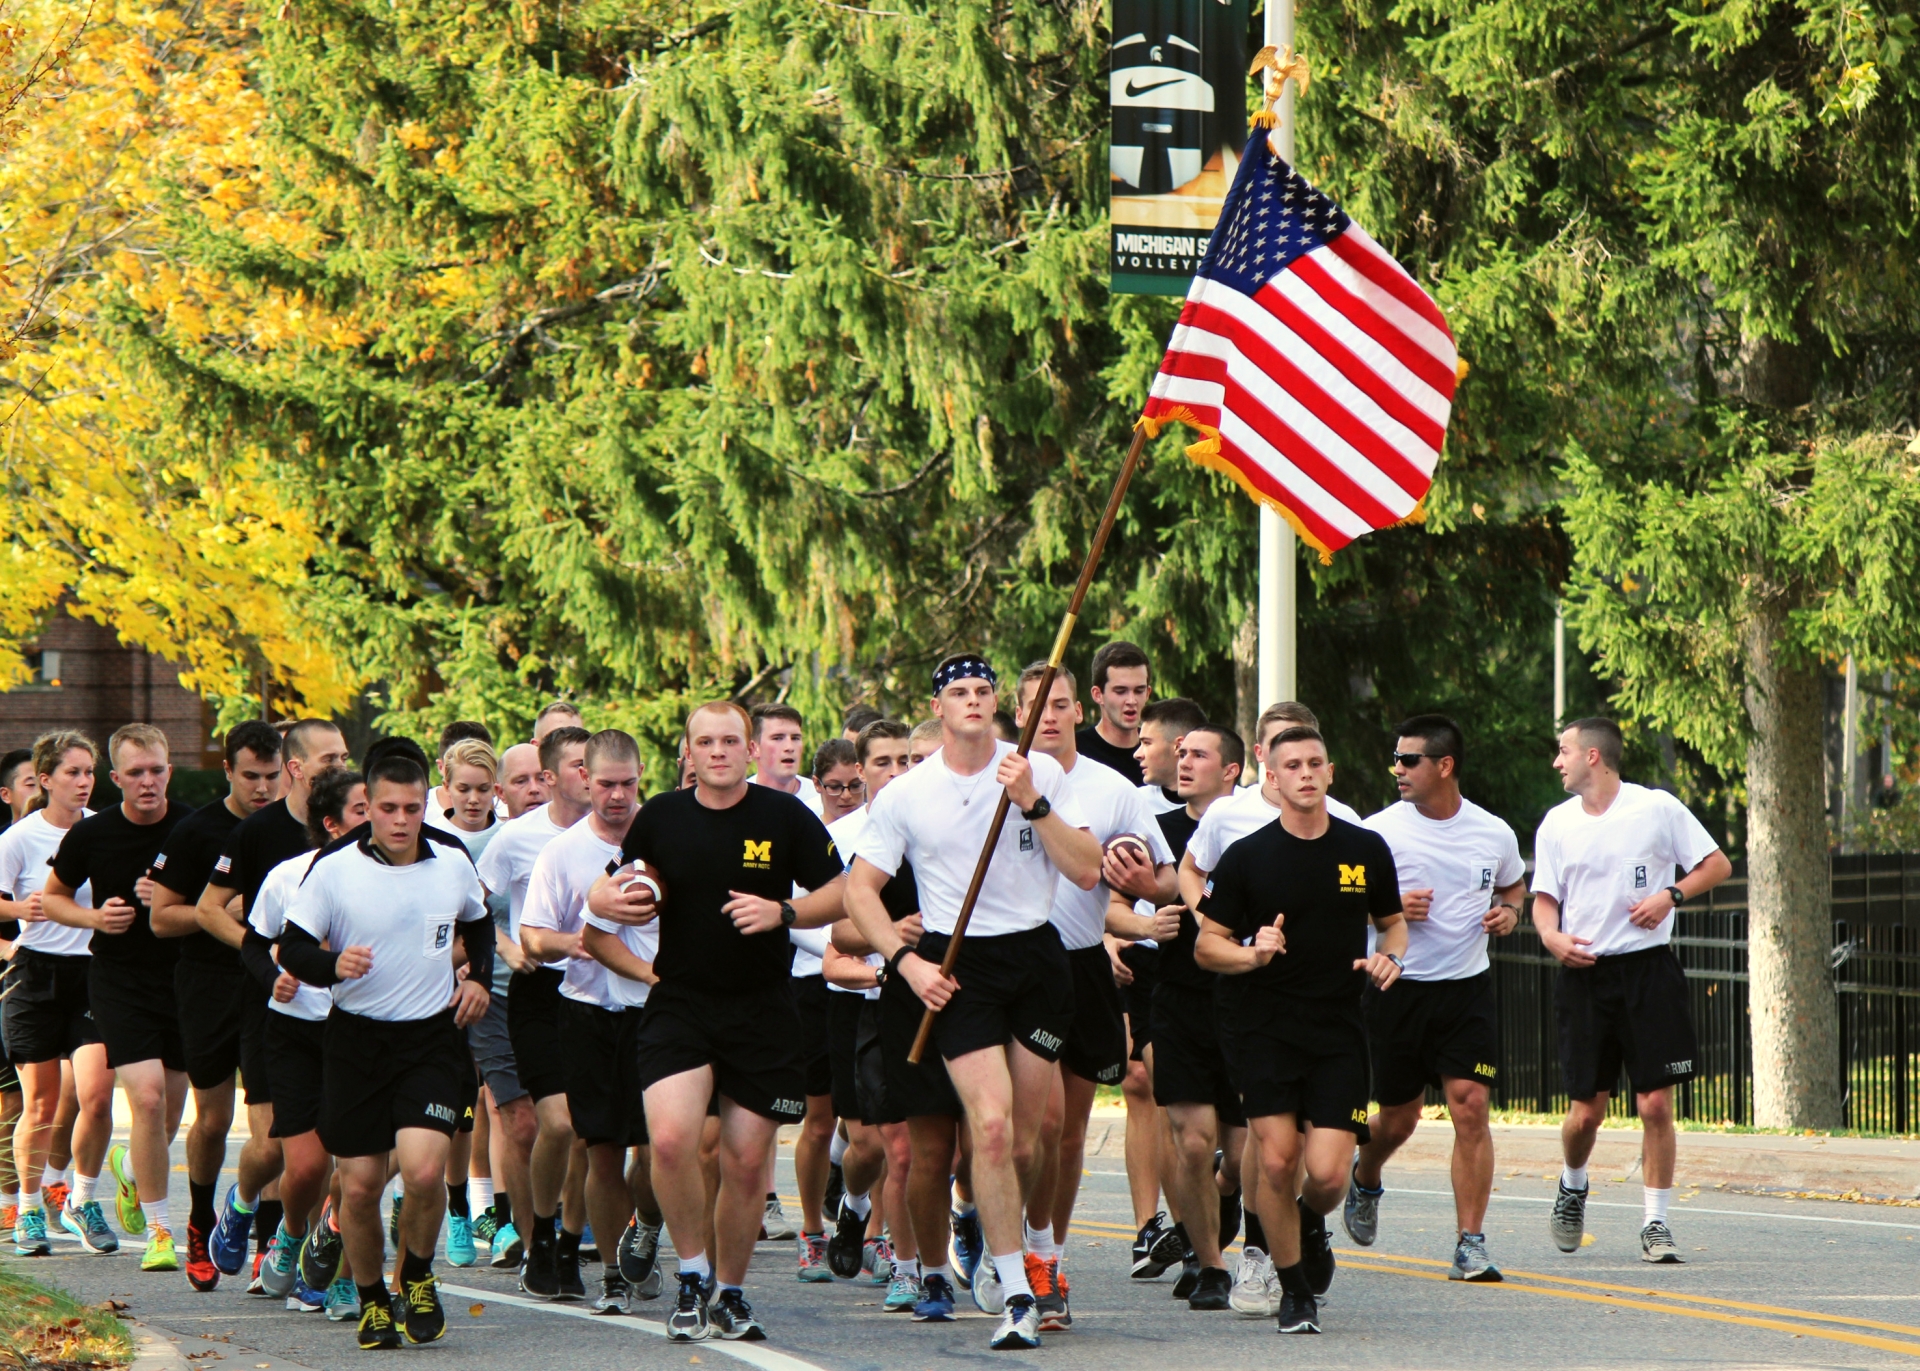 A group of ROTC cadets run down a street with trees in the background, holding a football and an American flag 